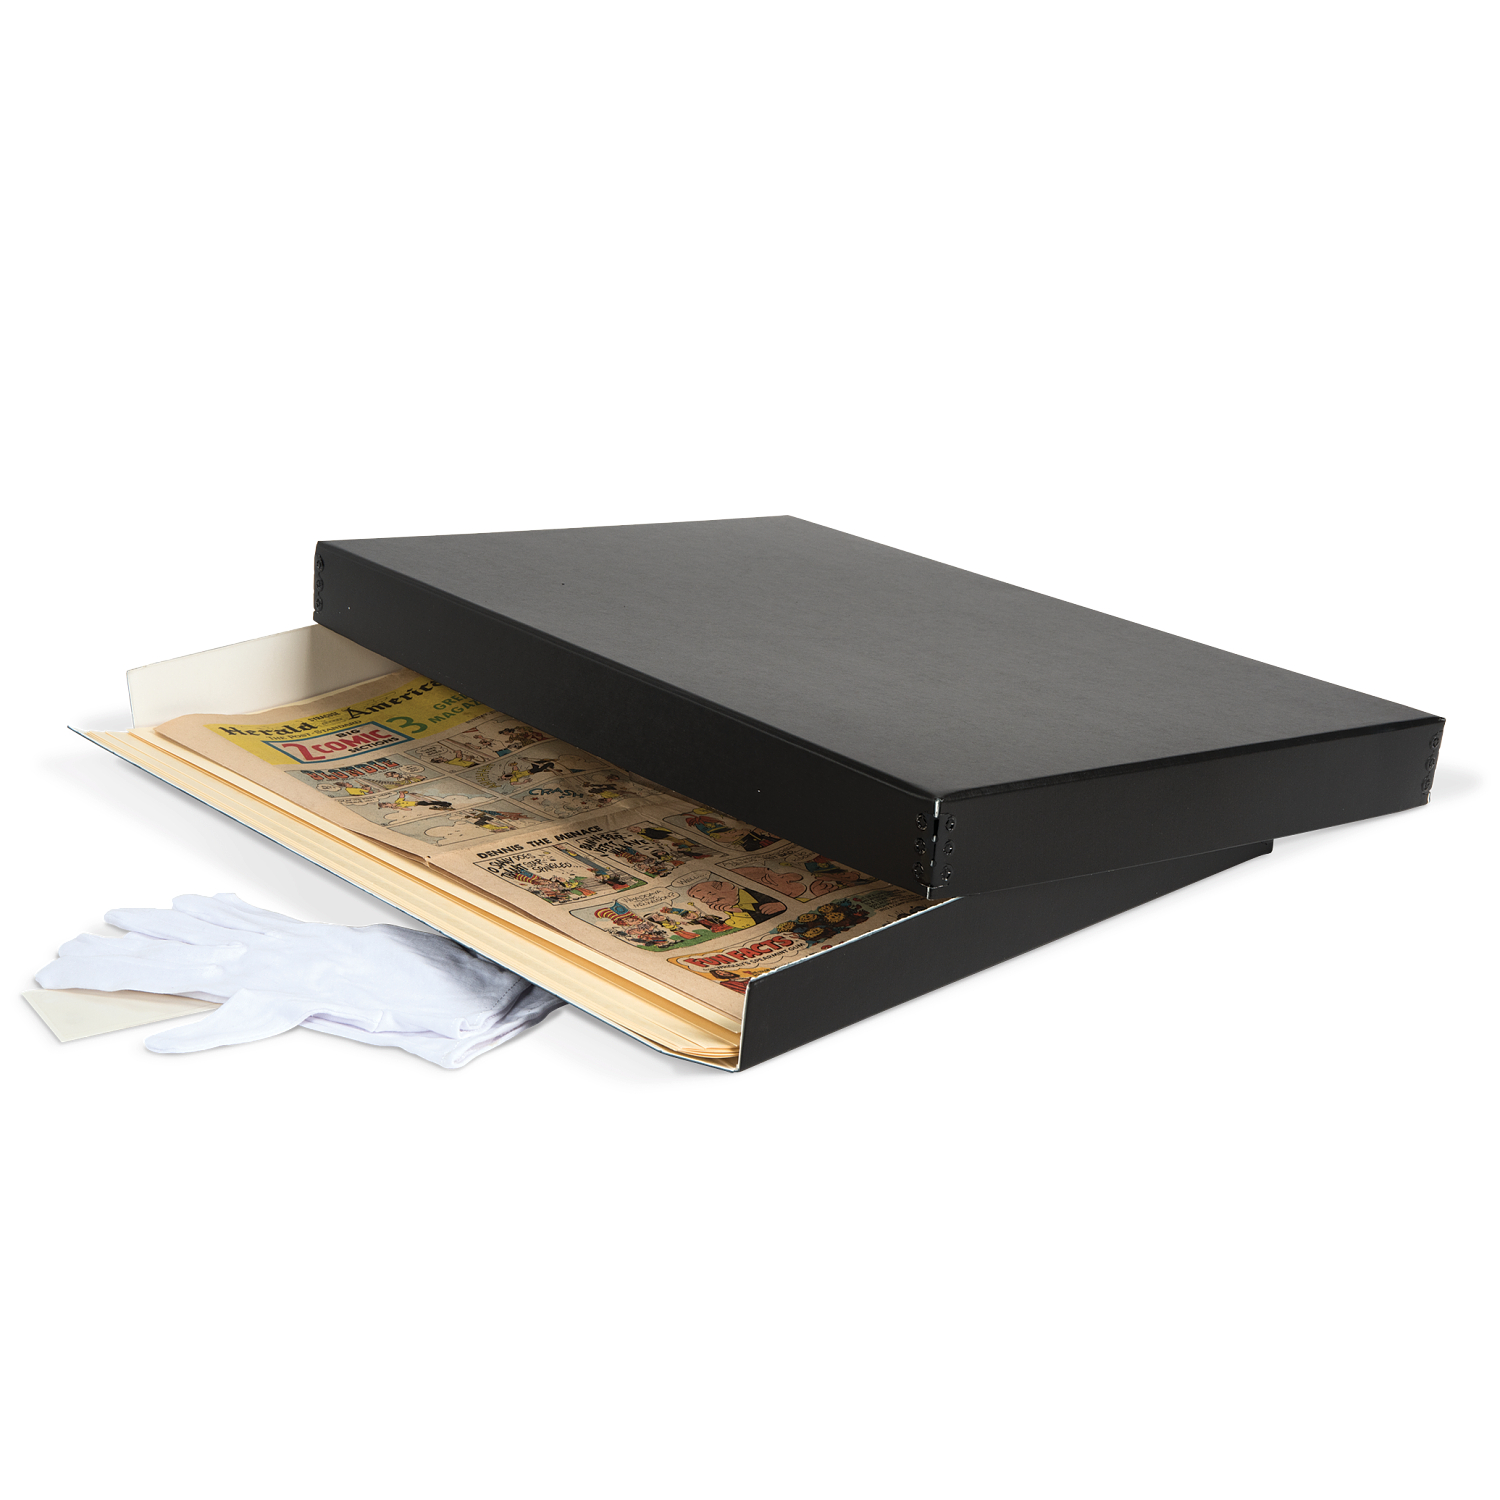 Gaylord Archival® 3 mil Archival Polyester Newspaper Sleeves (5-Pack), Archival Envelopes, Sleeves & Protectors, Preservation